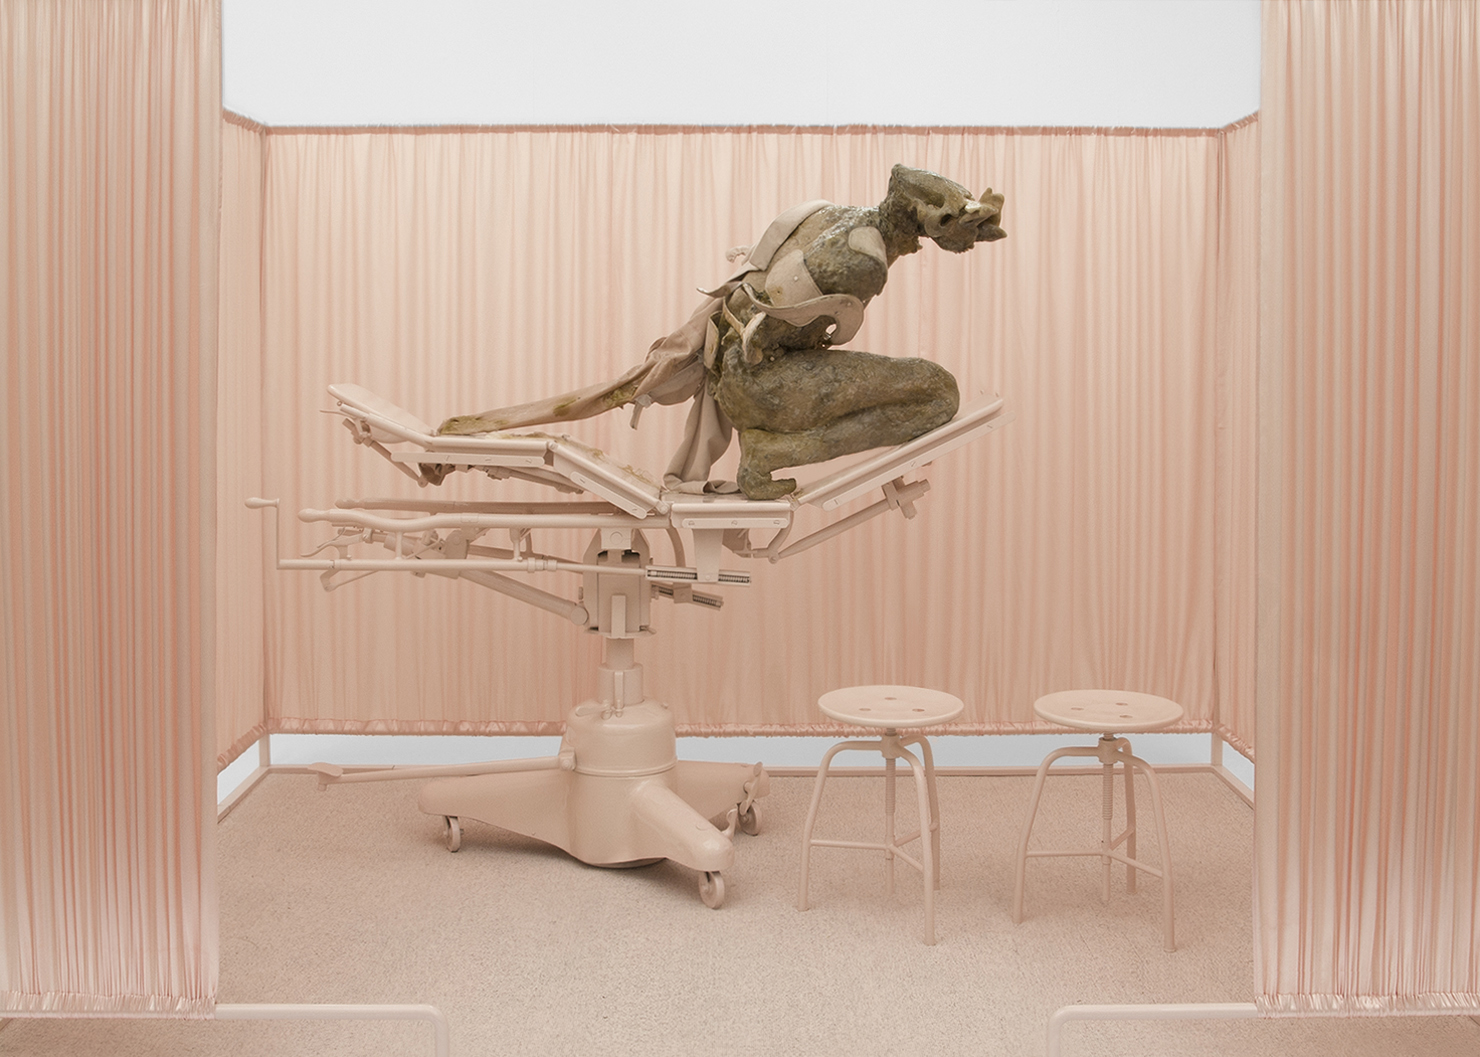 ONANIA / Aetiology Unknown 02 / 2012 / 300 x 200 x 190 cm 
fat, leather, fur, cosmetics, fabric, polyvinyl acetate, enamel, 
steel, surgical table and accessories